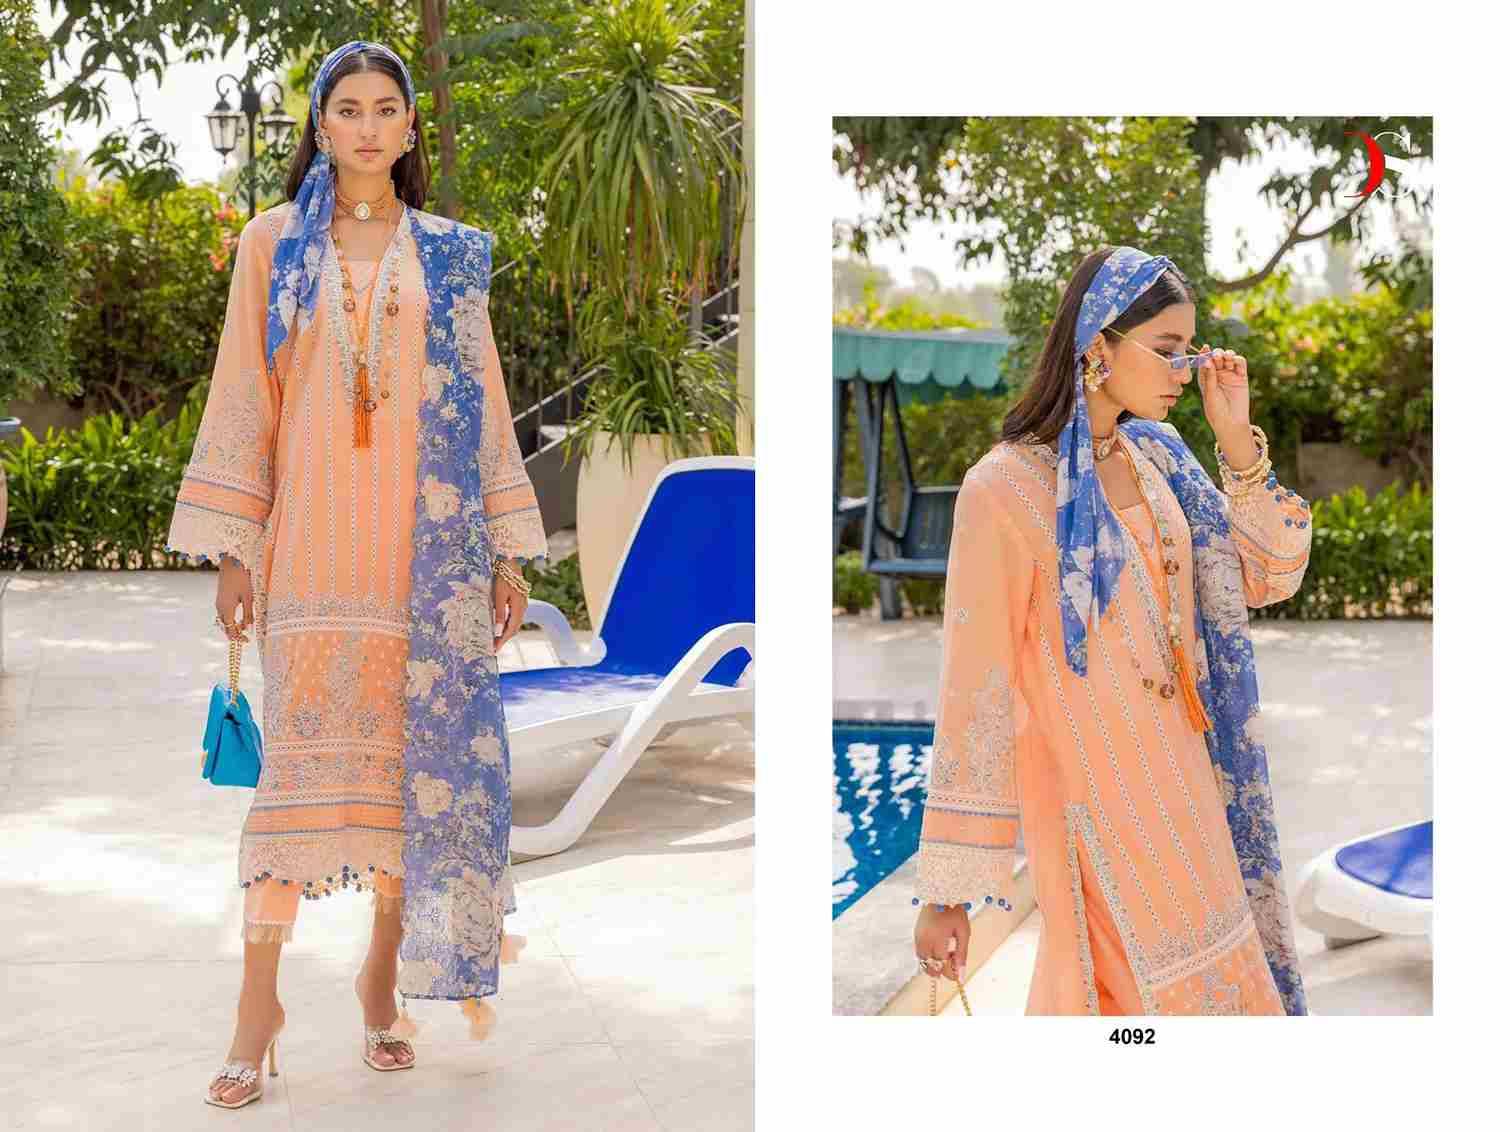 Adans Libas Inlays-24 By Deepsy Suits 4091 To 4094 Series Designer Pakistani Suits Beautiful Stylish Fancy Colorful Party Wear & Occasional Wear Pure Cotton Dresses At Wholesale Price